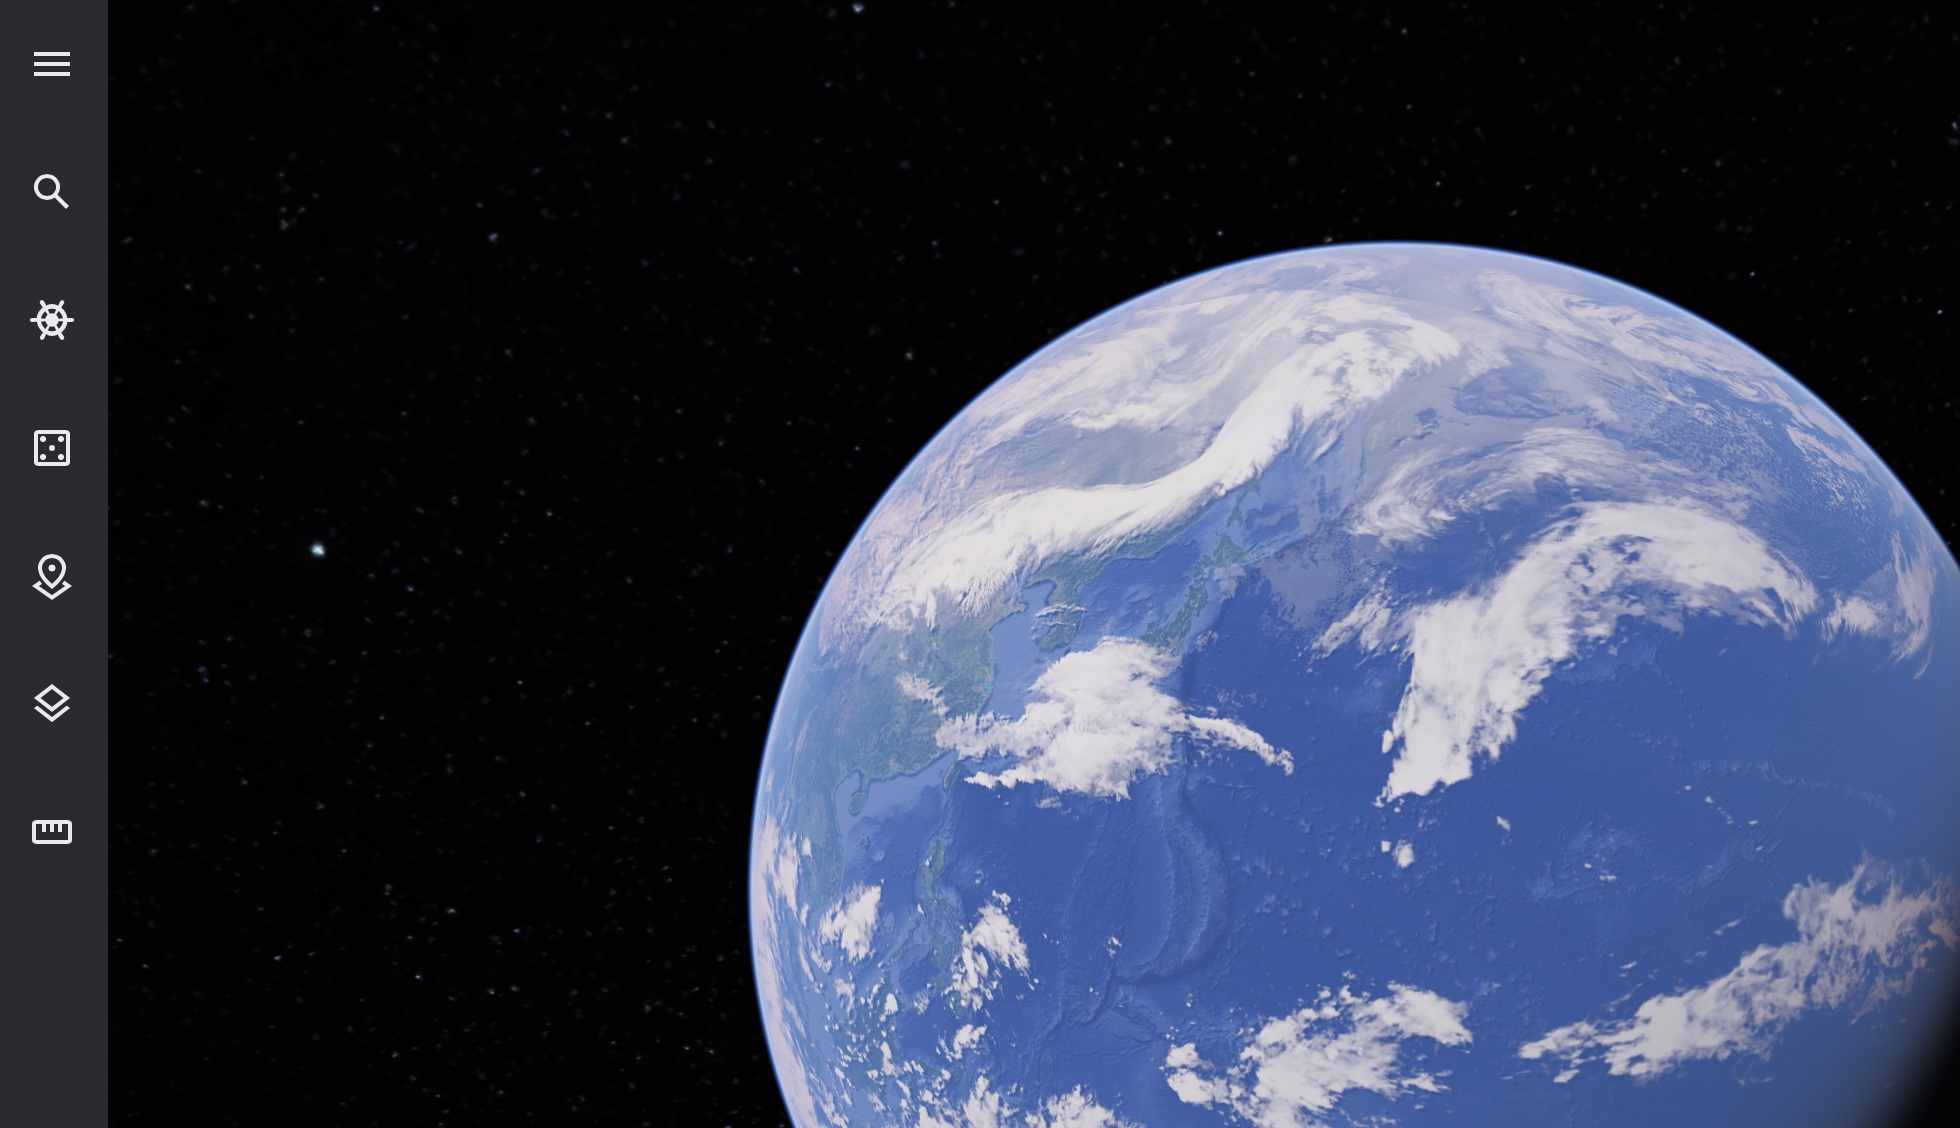 Google Earth keeps Crashing - Here are 4 steps to fix this problem